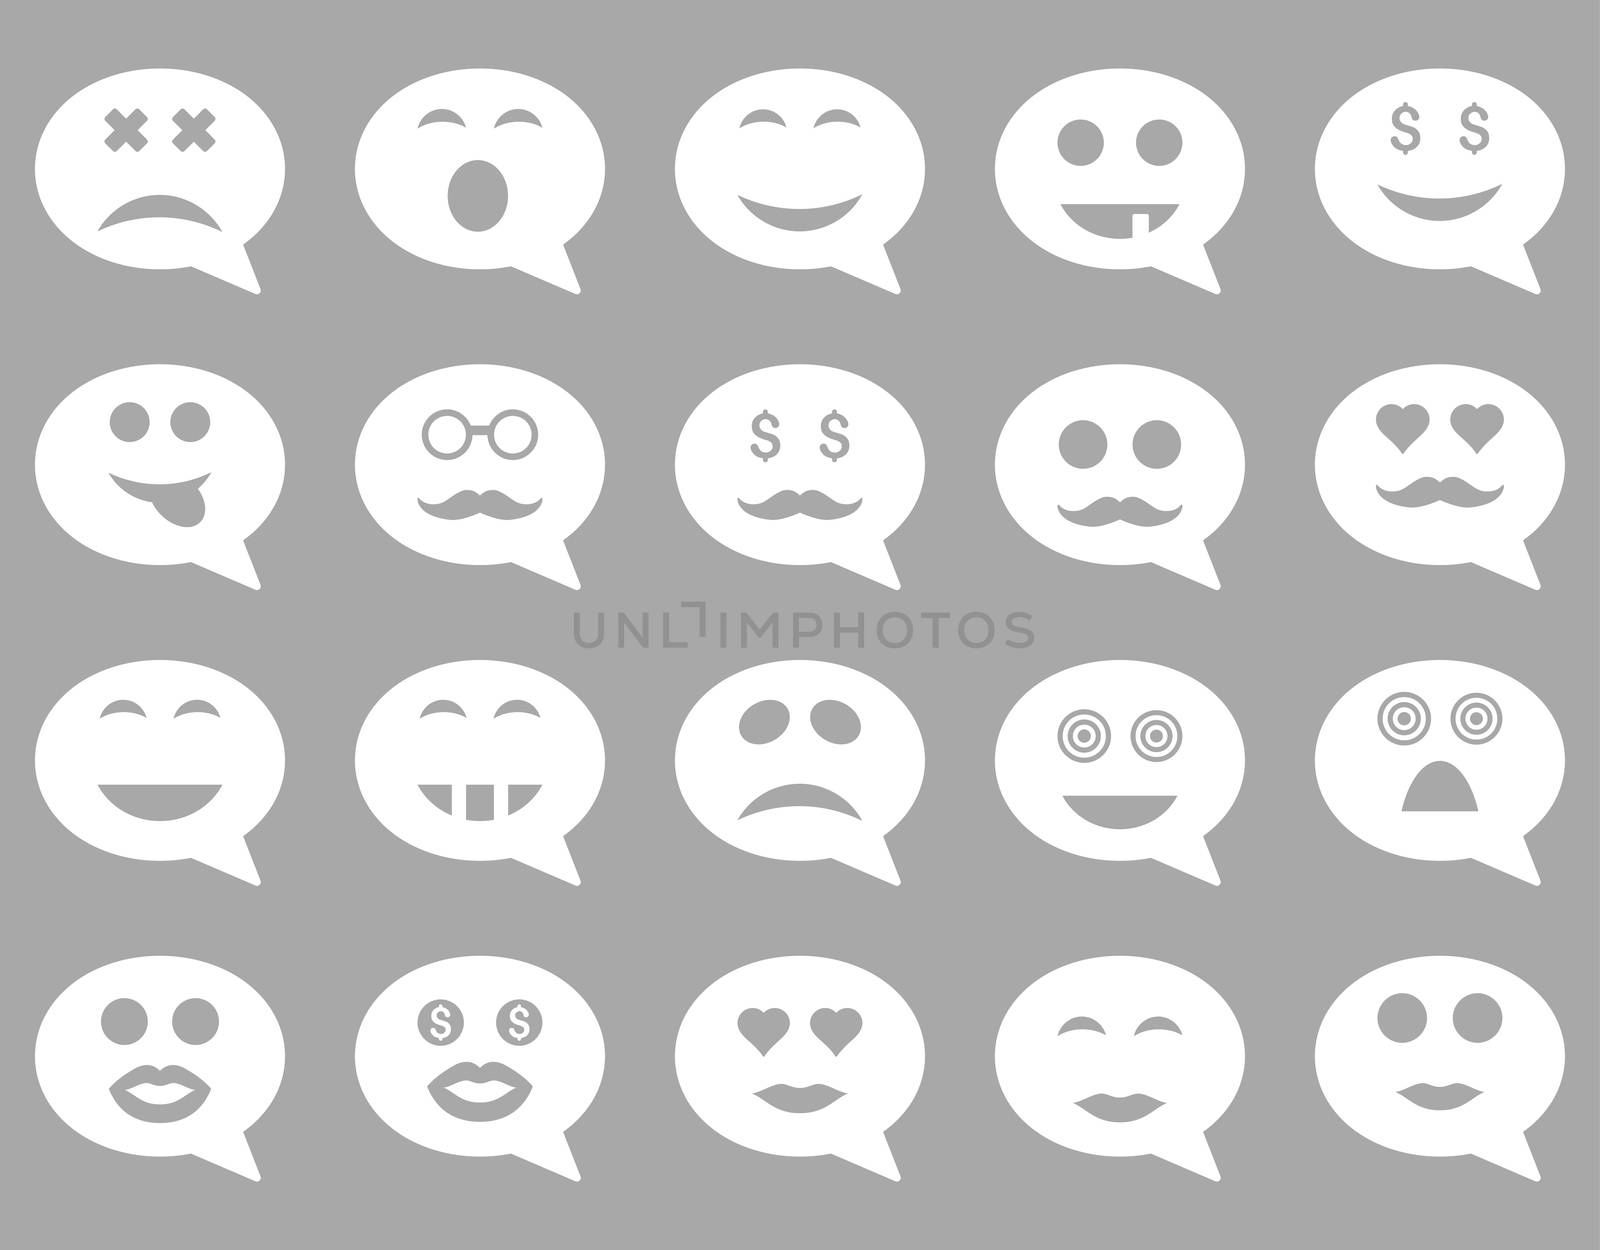 Chat emotion smile icons. Glyph set style is flat images, white symbols, isolated on a silver background.